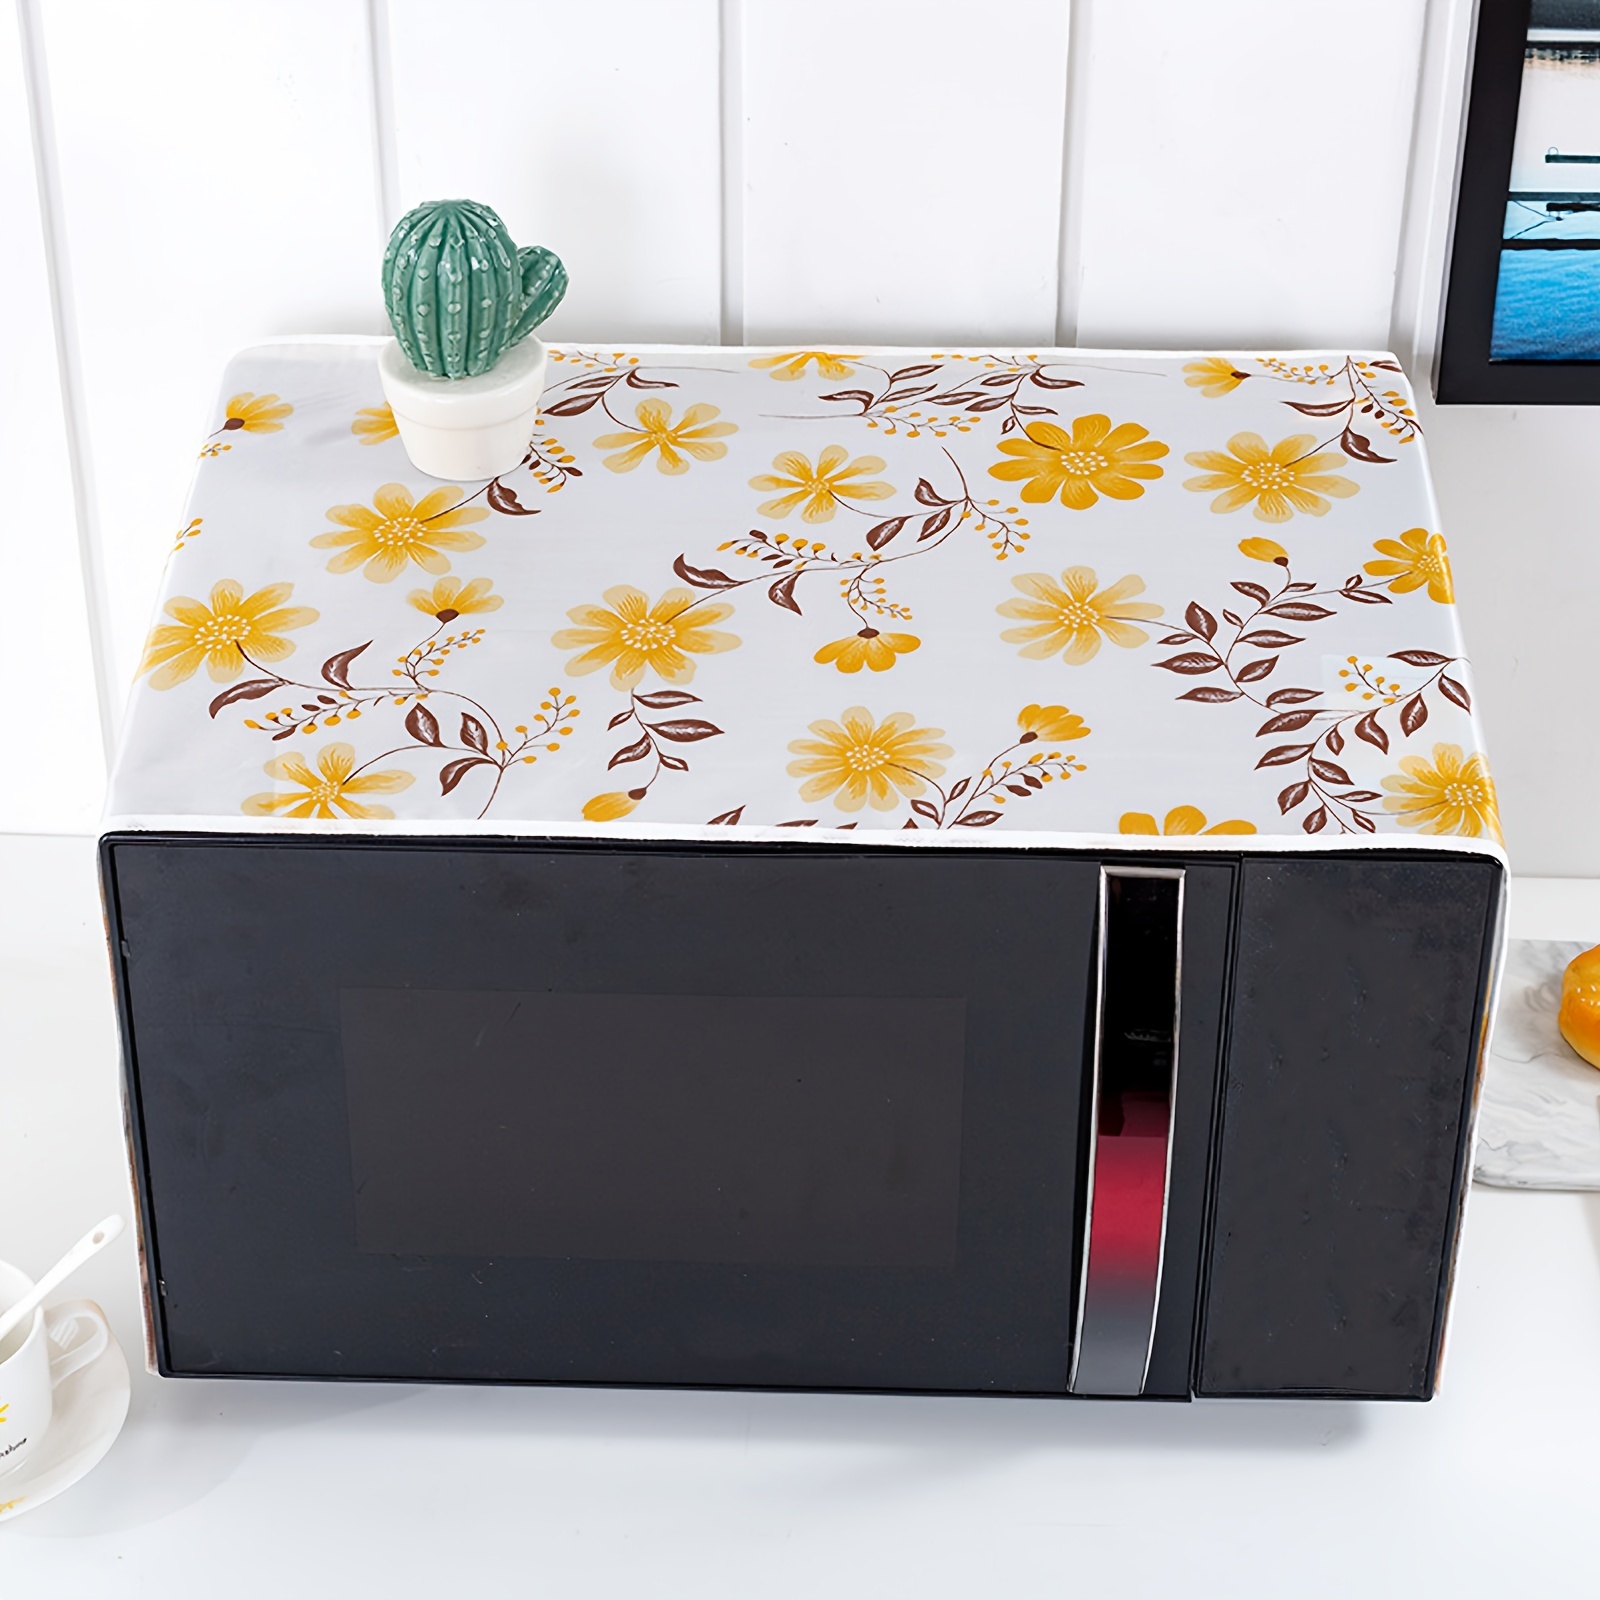 

Decorative Microwave Oven Cover With 4 Storage Pockets - Kitchen Appliance Protector